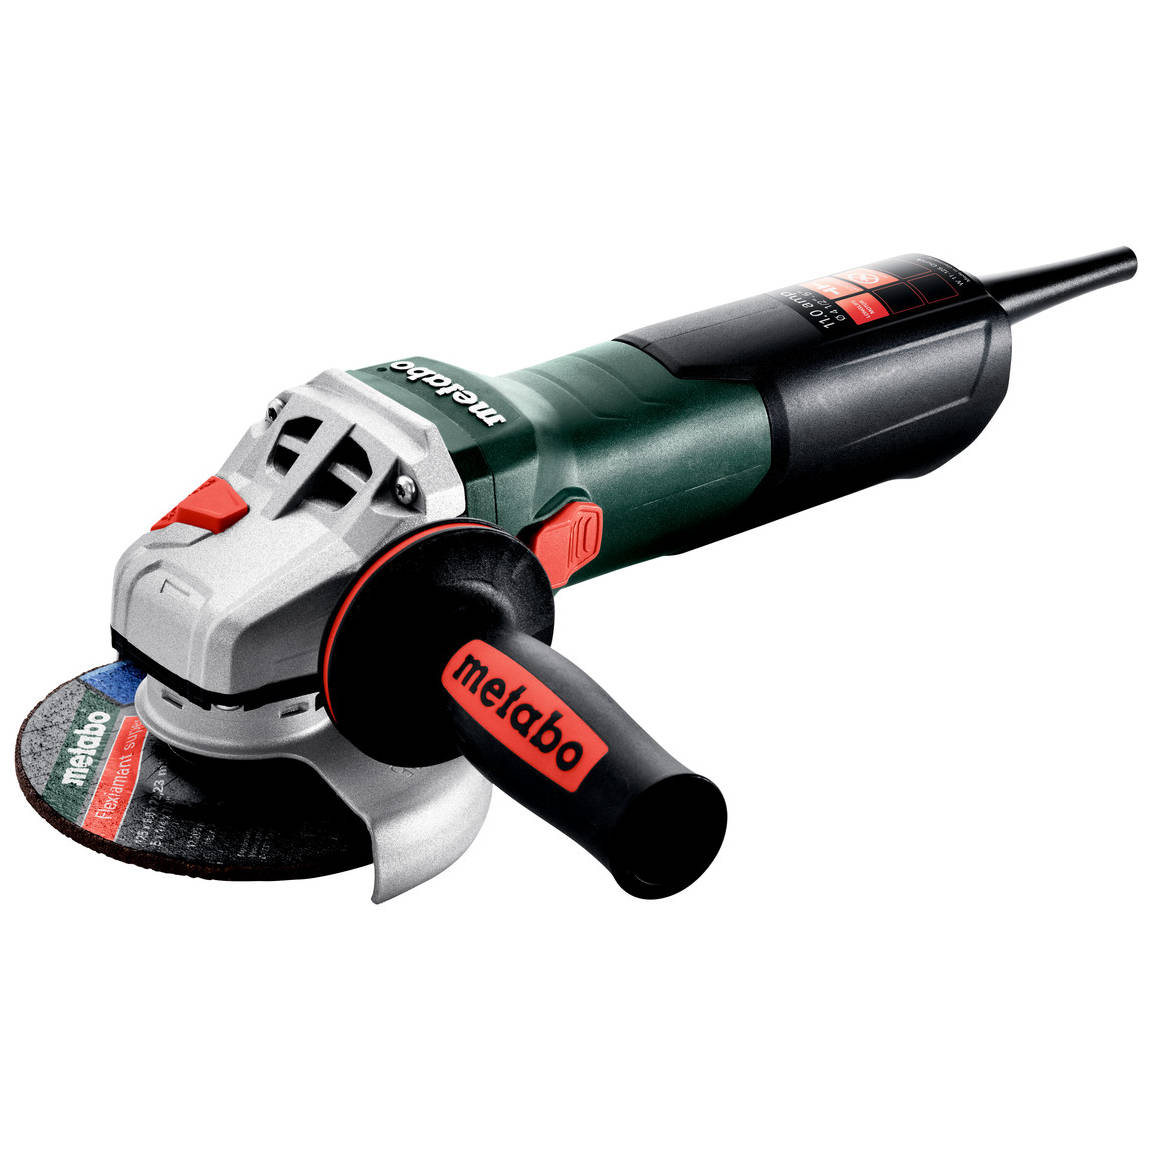 W11-125 QUICK Metabo 4.5/5" Angle Grinder